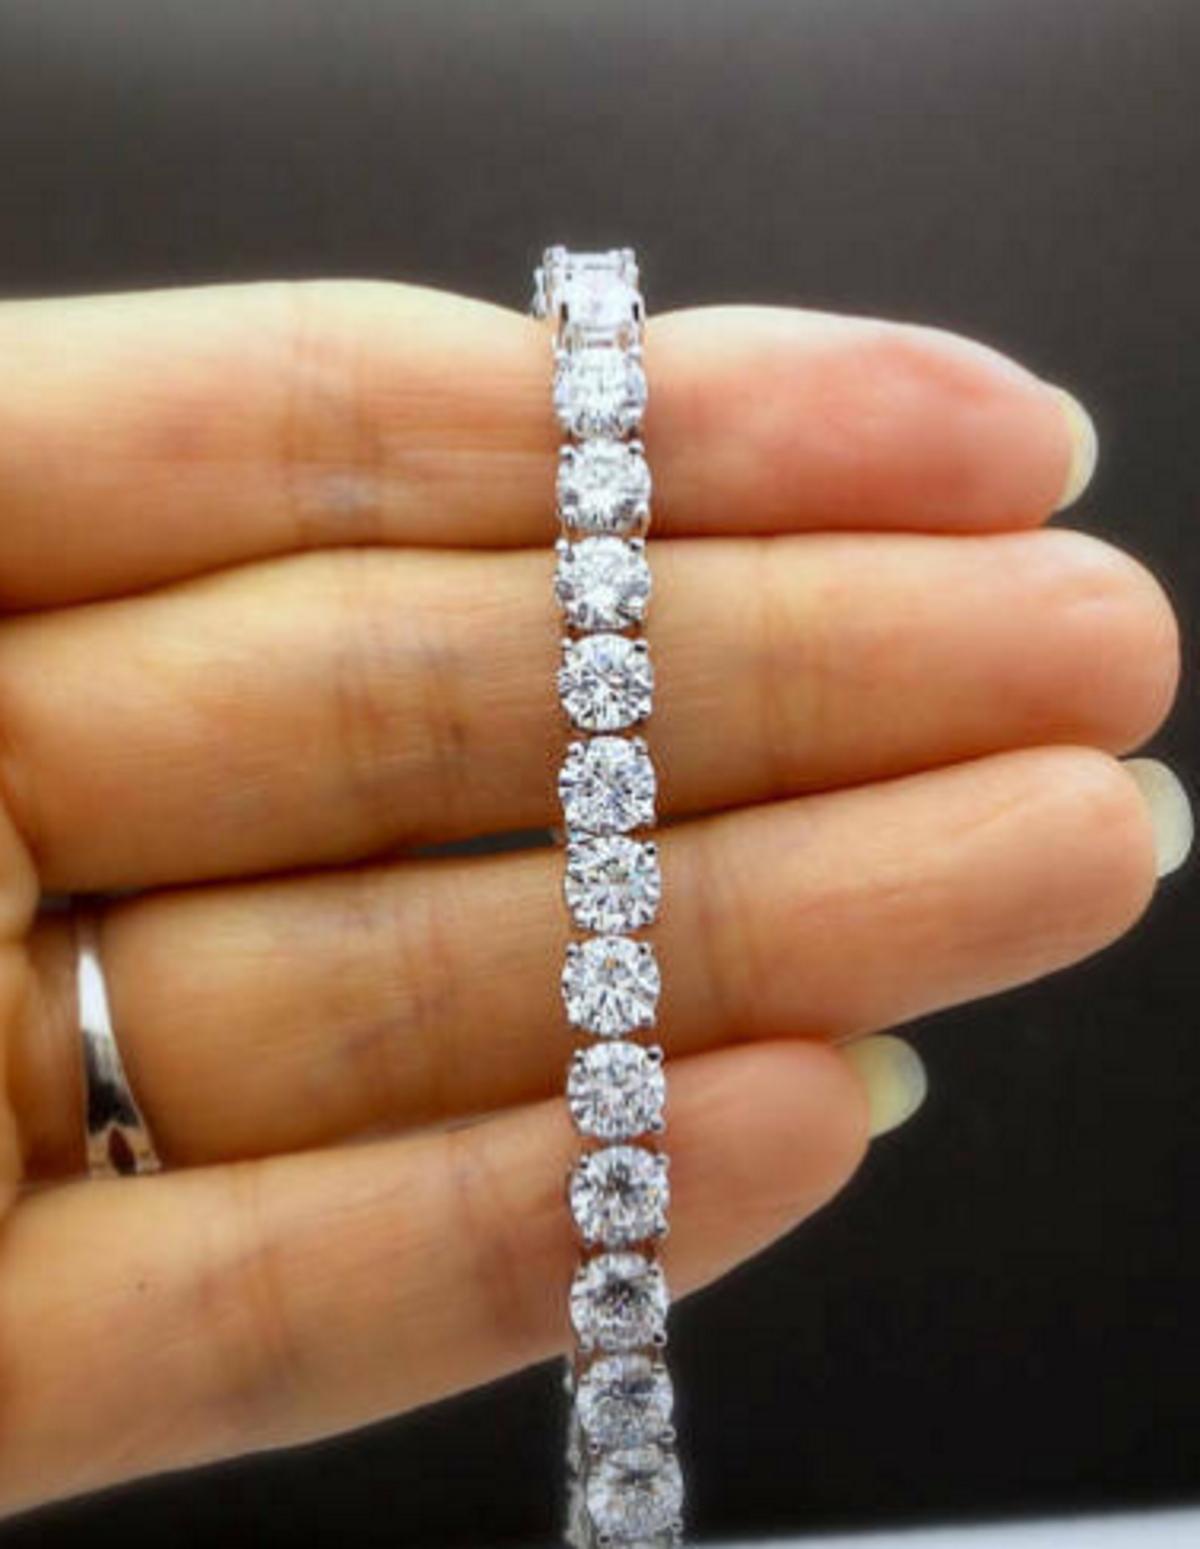 This gorgeous necklace will simply take your breath away! It features a 65 natural round brilliant cut diamonds.These sparkling diamonds conservatively grade as F/G VS1-SI1 in quality. The diamonds are set in a 18 carat white gold riviera or tennis